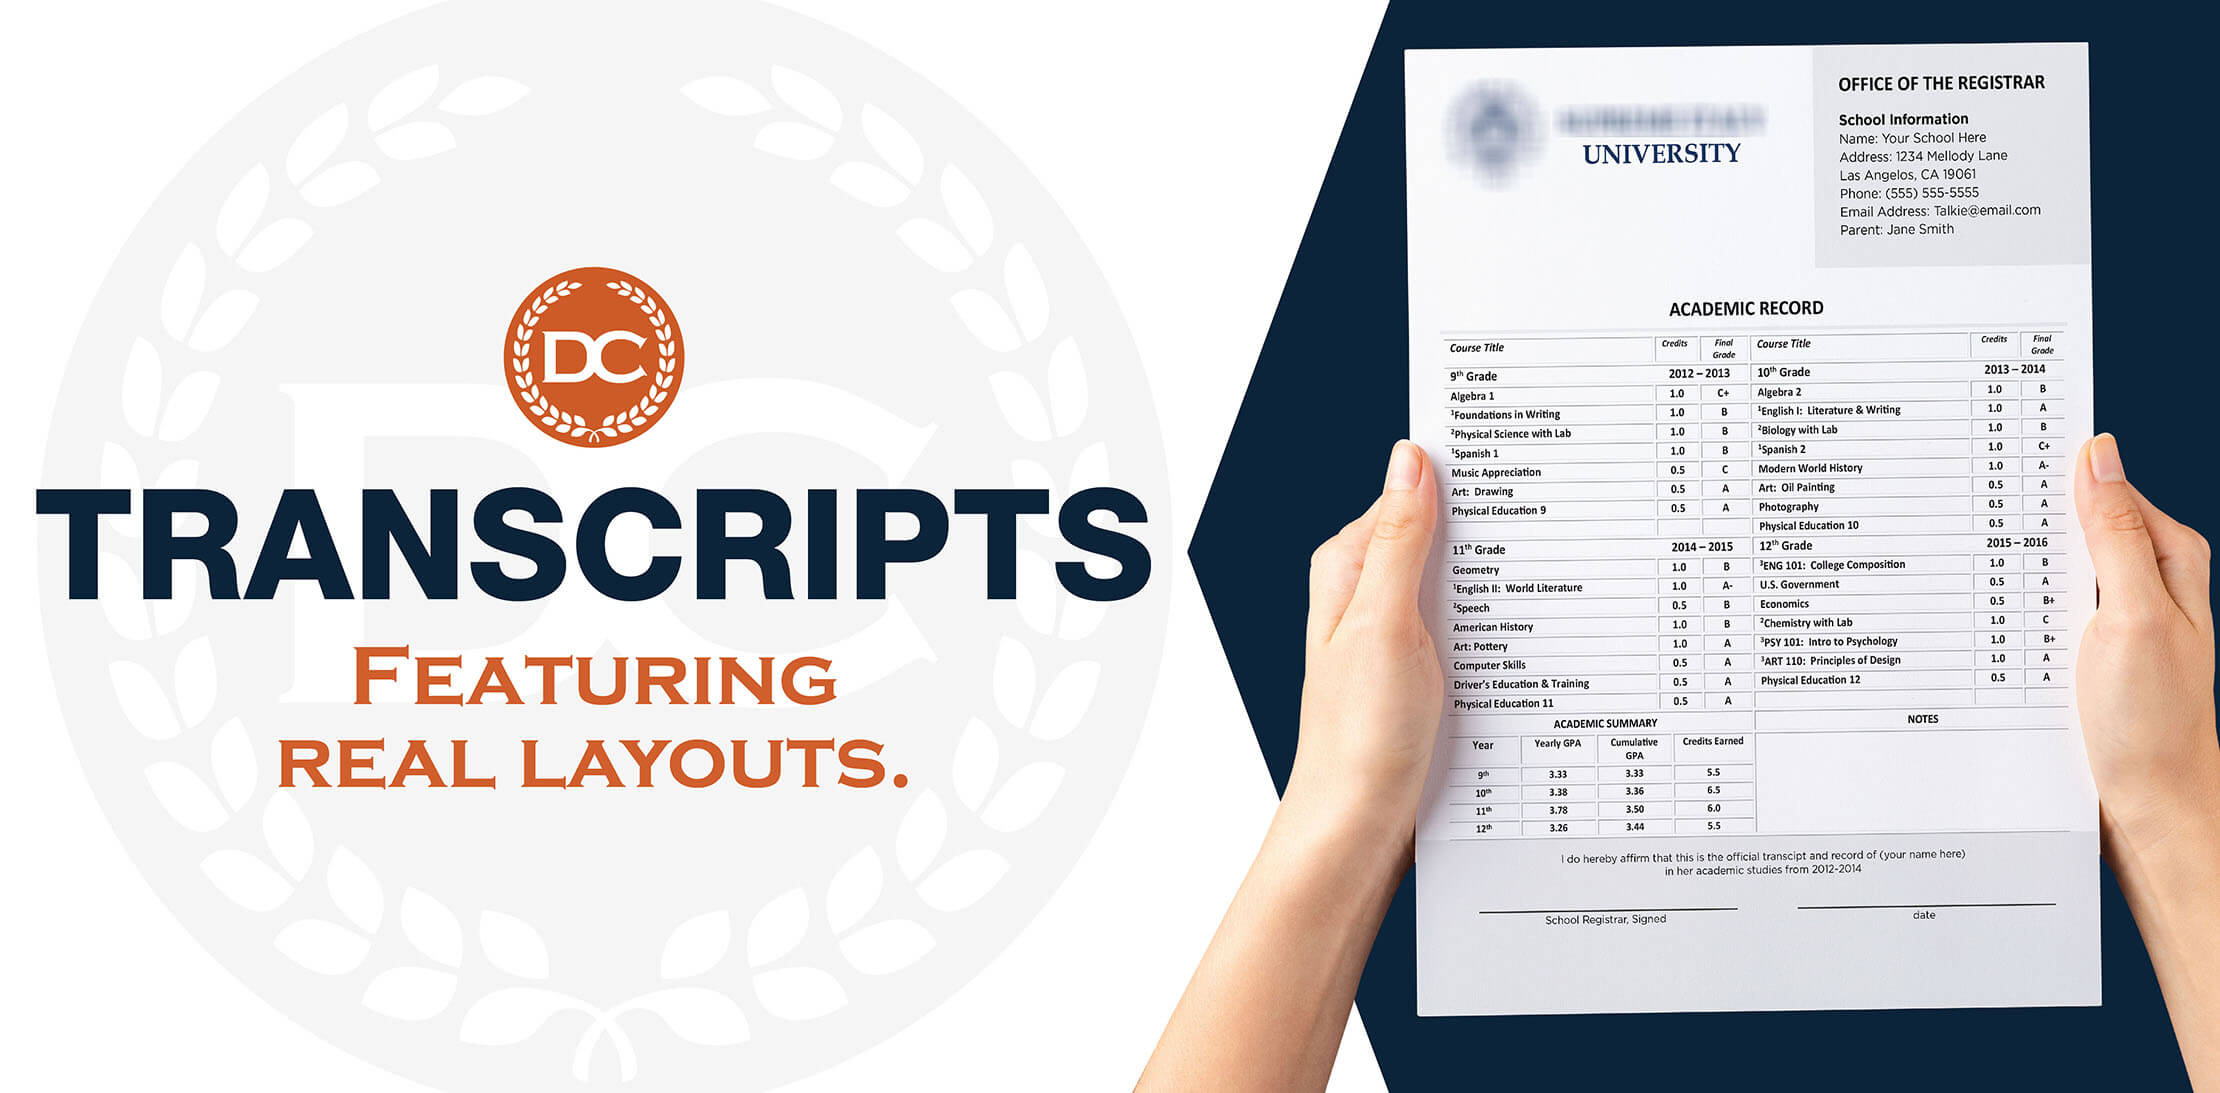 Buy fake transcripts from high schools and colleges. Features real classes and custom scores. Arrives fast, risk-free guaranteed and we price match!
